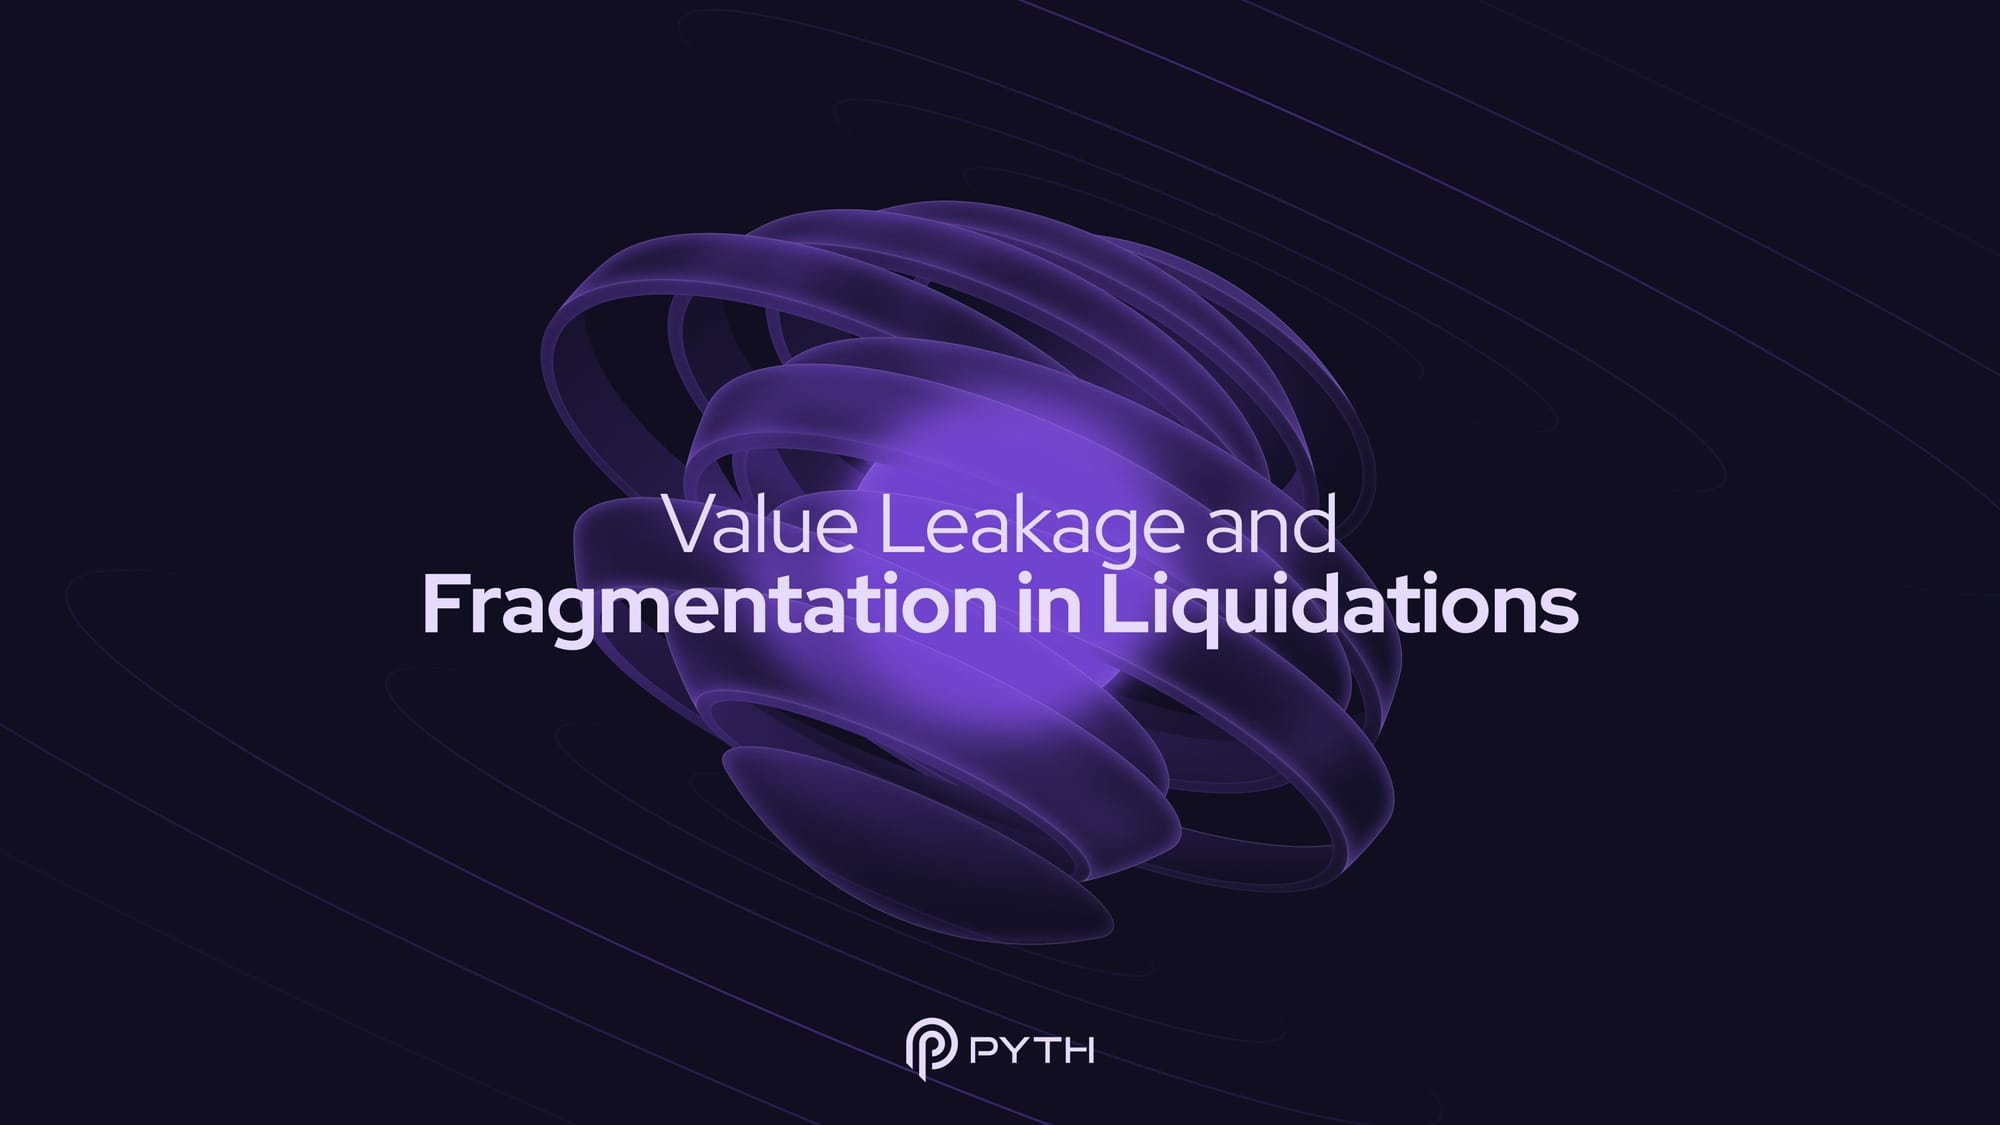 Value Leakage and Fragmentation in Liquidations